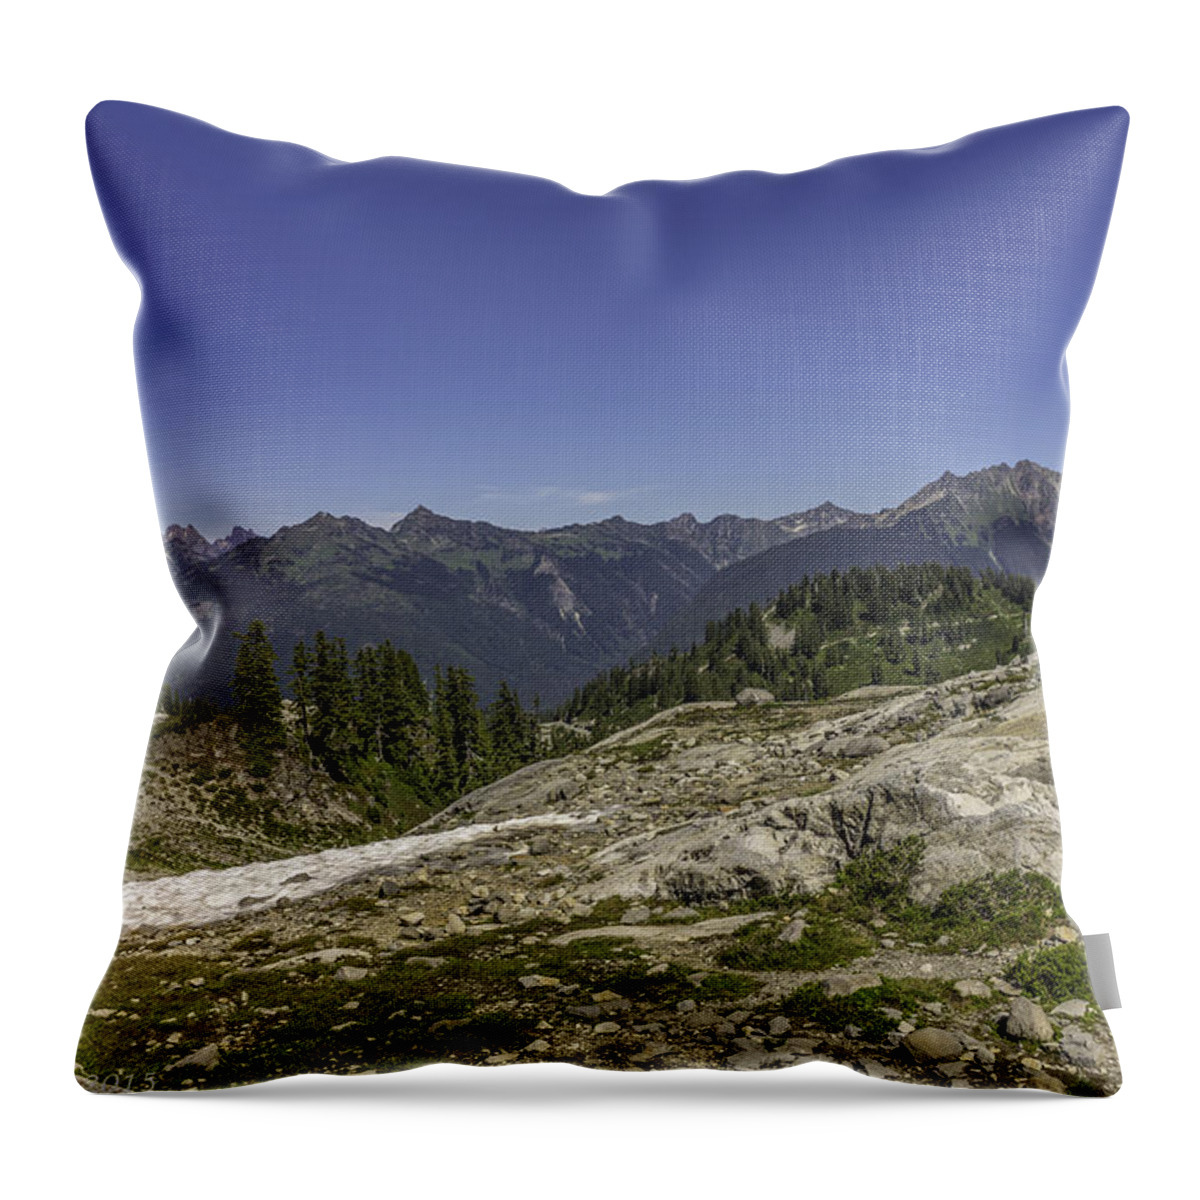 Mountains Throw Pillow featuring the photograph Mt. Baker Foothills by Mark Joseph